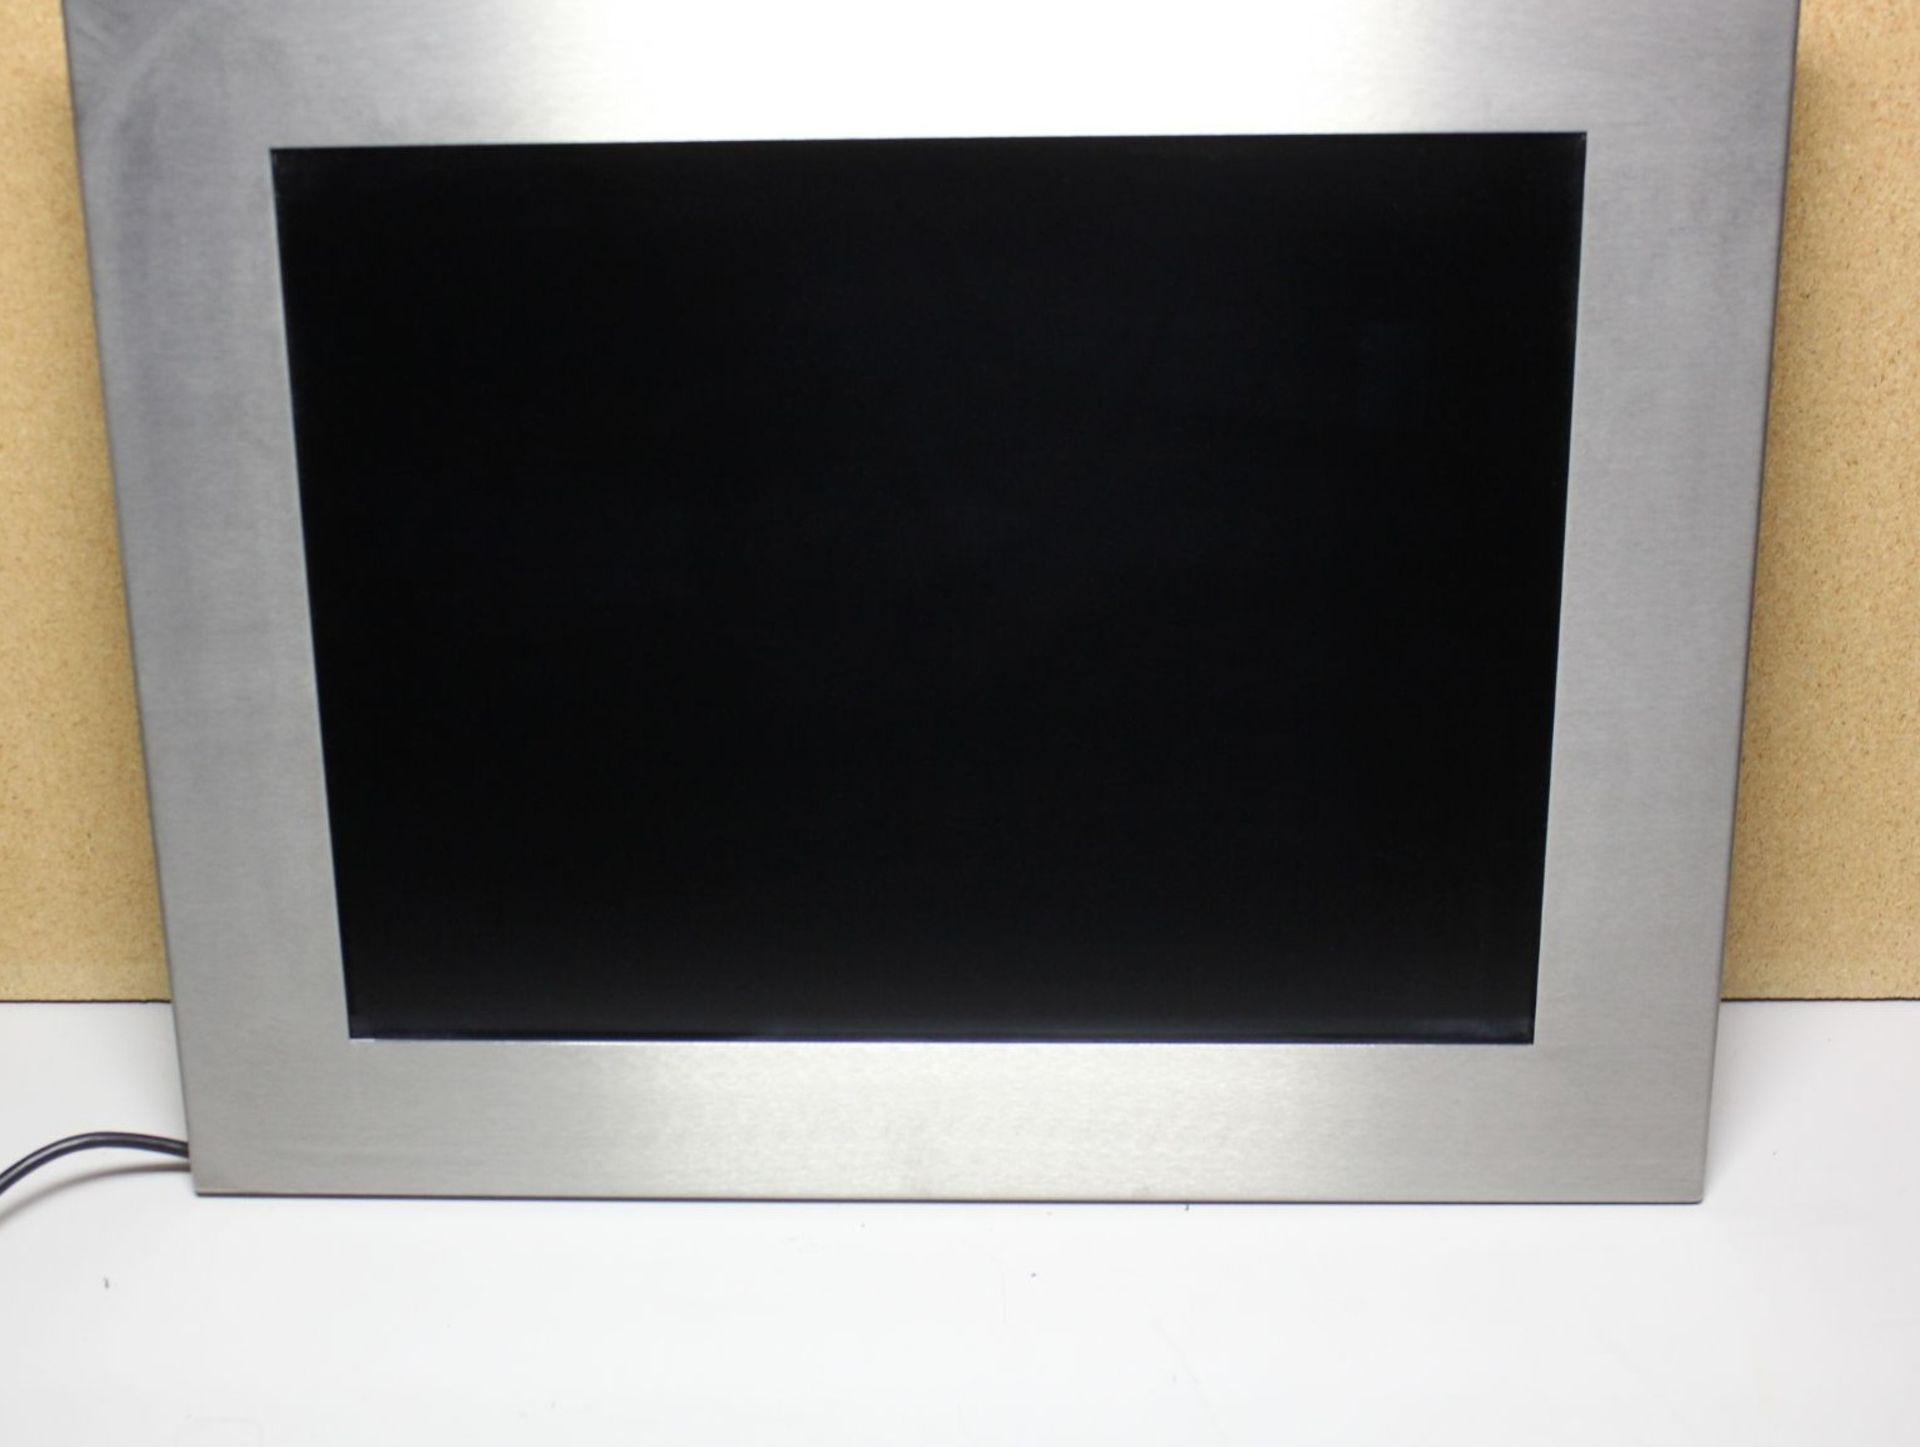 HOPE INDUSTRIAL 20" INDUSTRIAL MONITOR AND TOUCH SCREEN HMI - Image 2 of 9